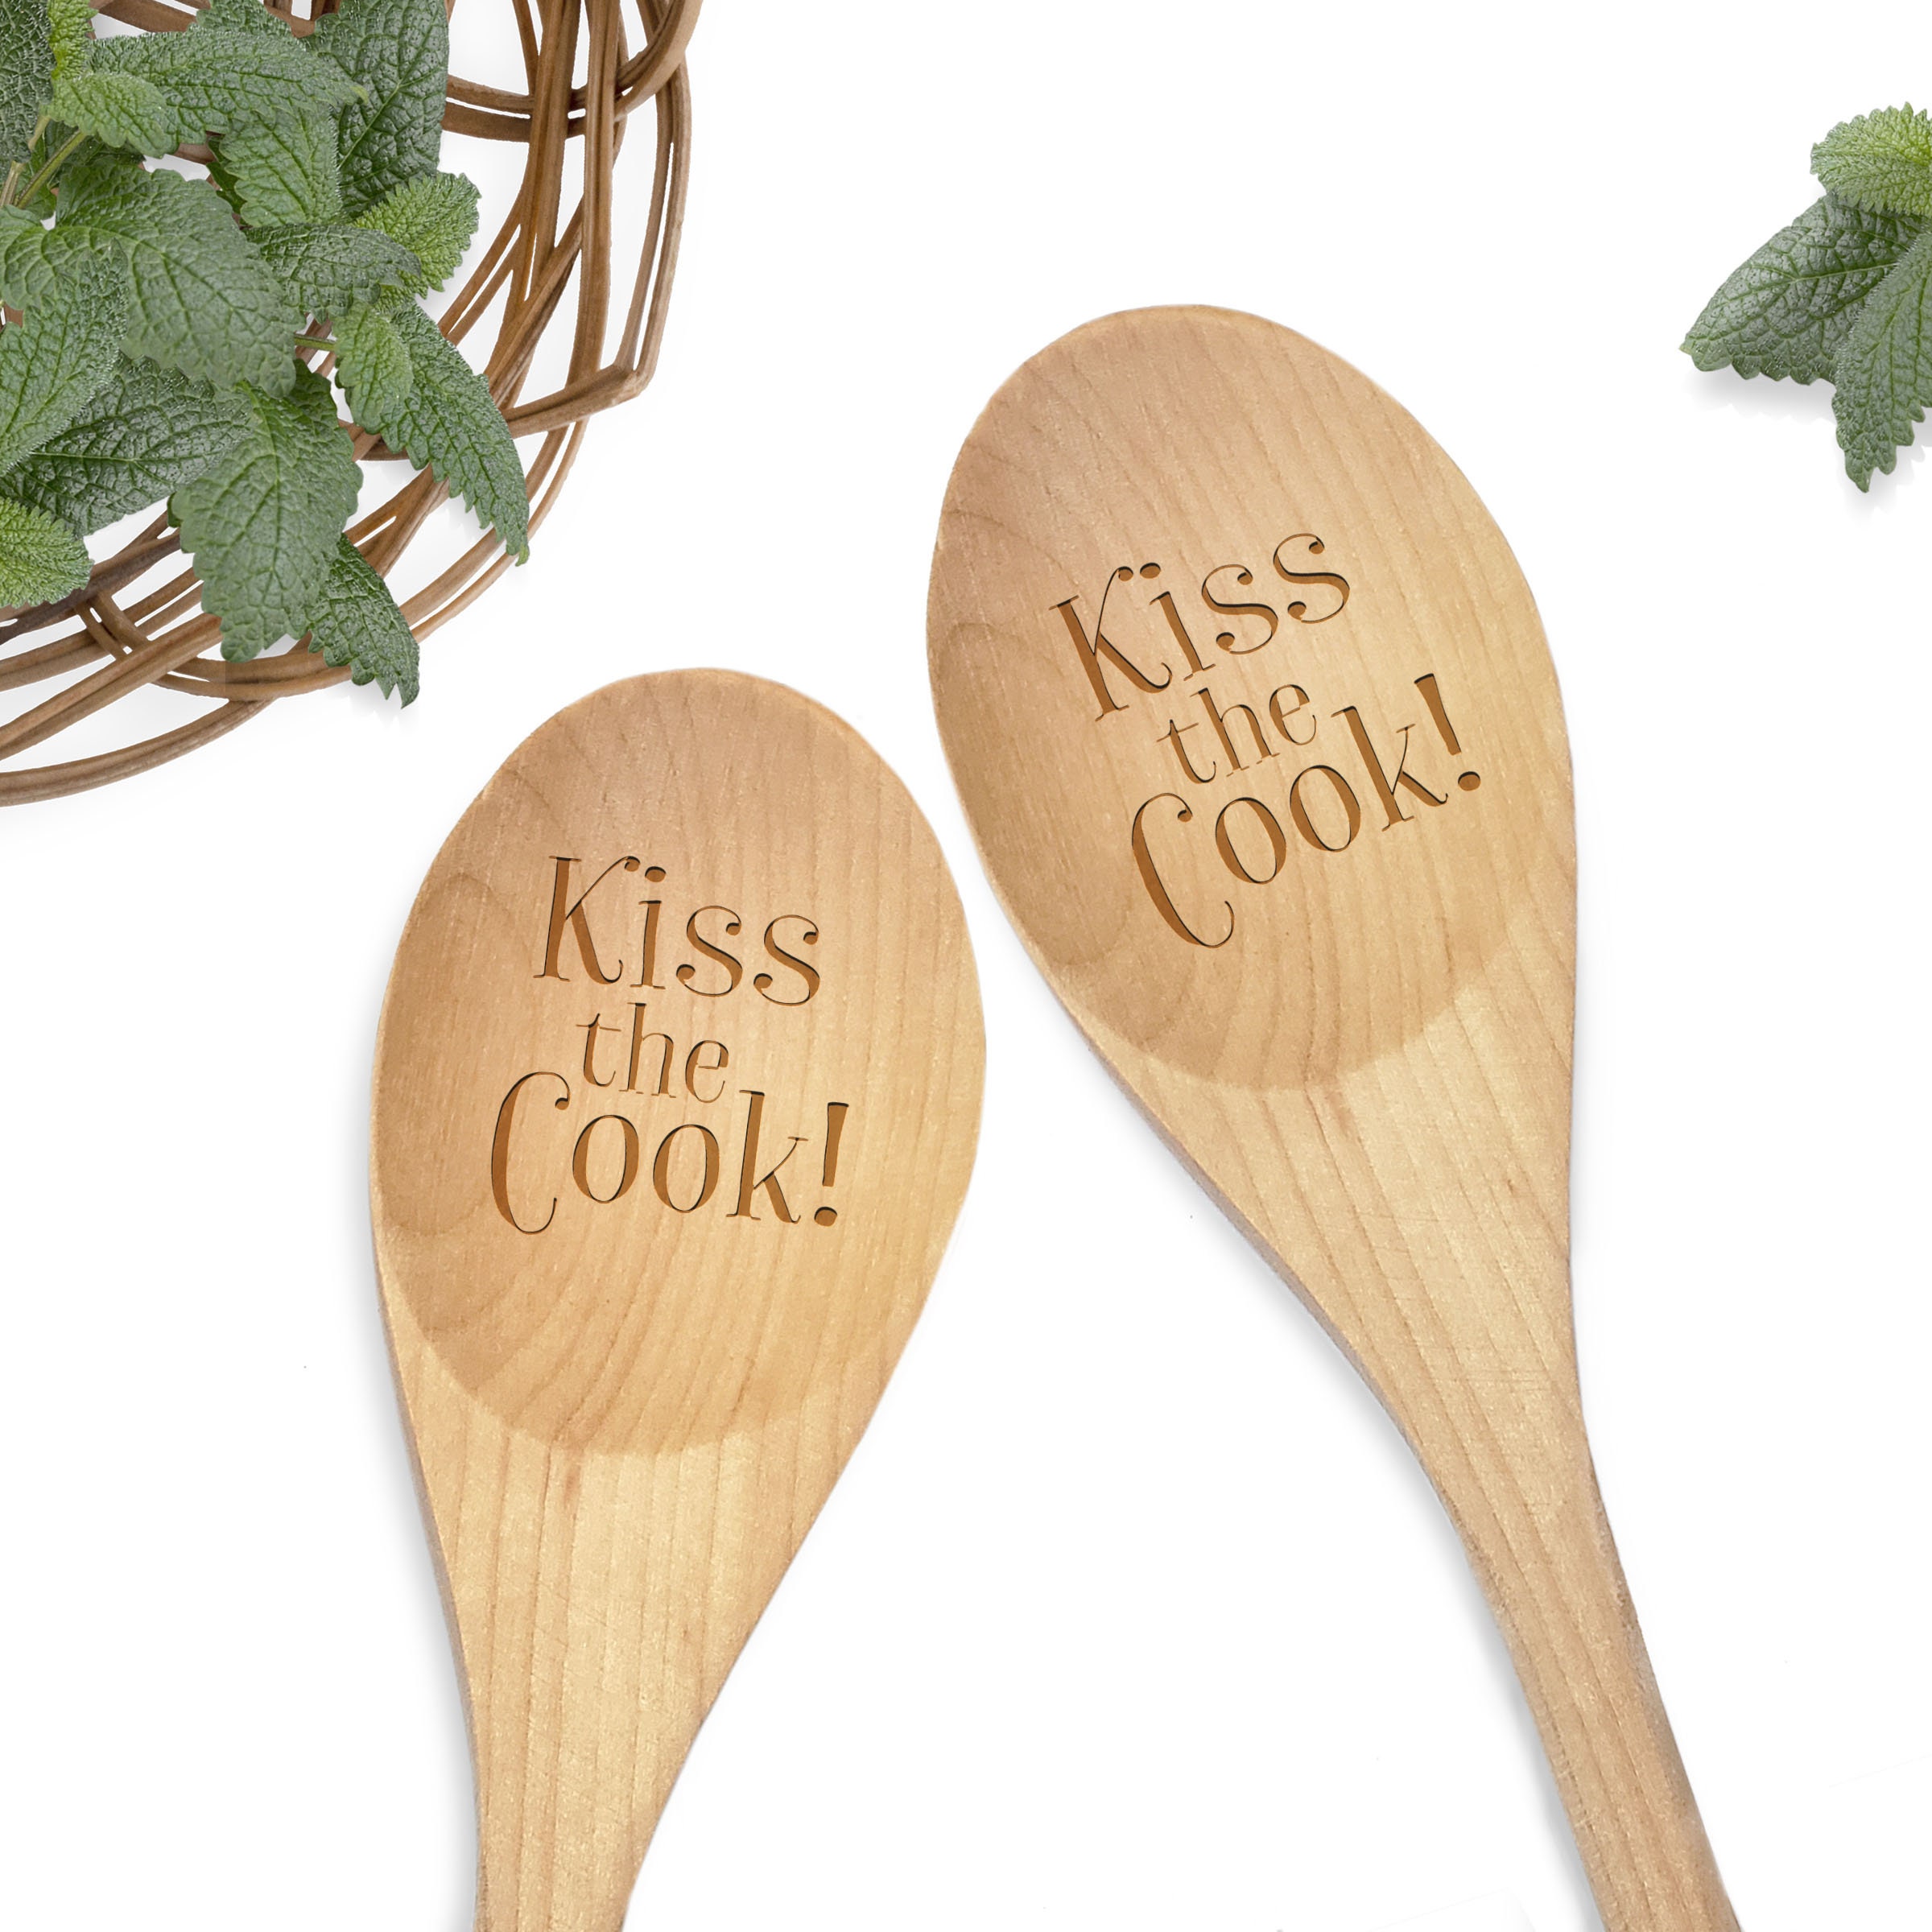 12 Kiss the cook funny engraved kitchen wooden mixing spoon l baking l cooking serving utensil white elephant Christmas gift 12